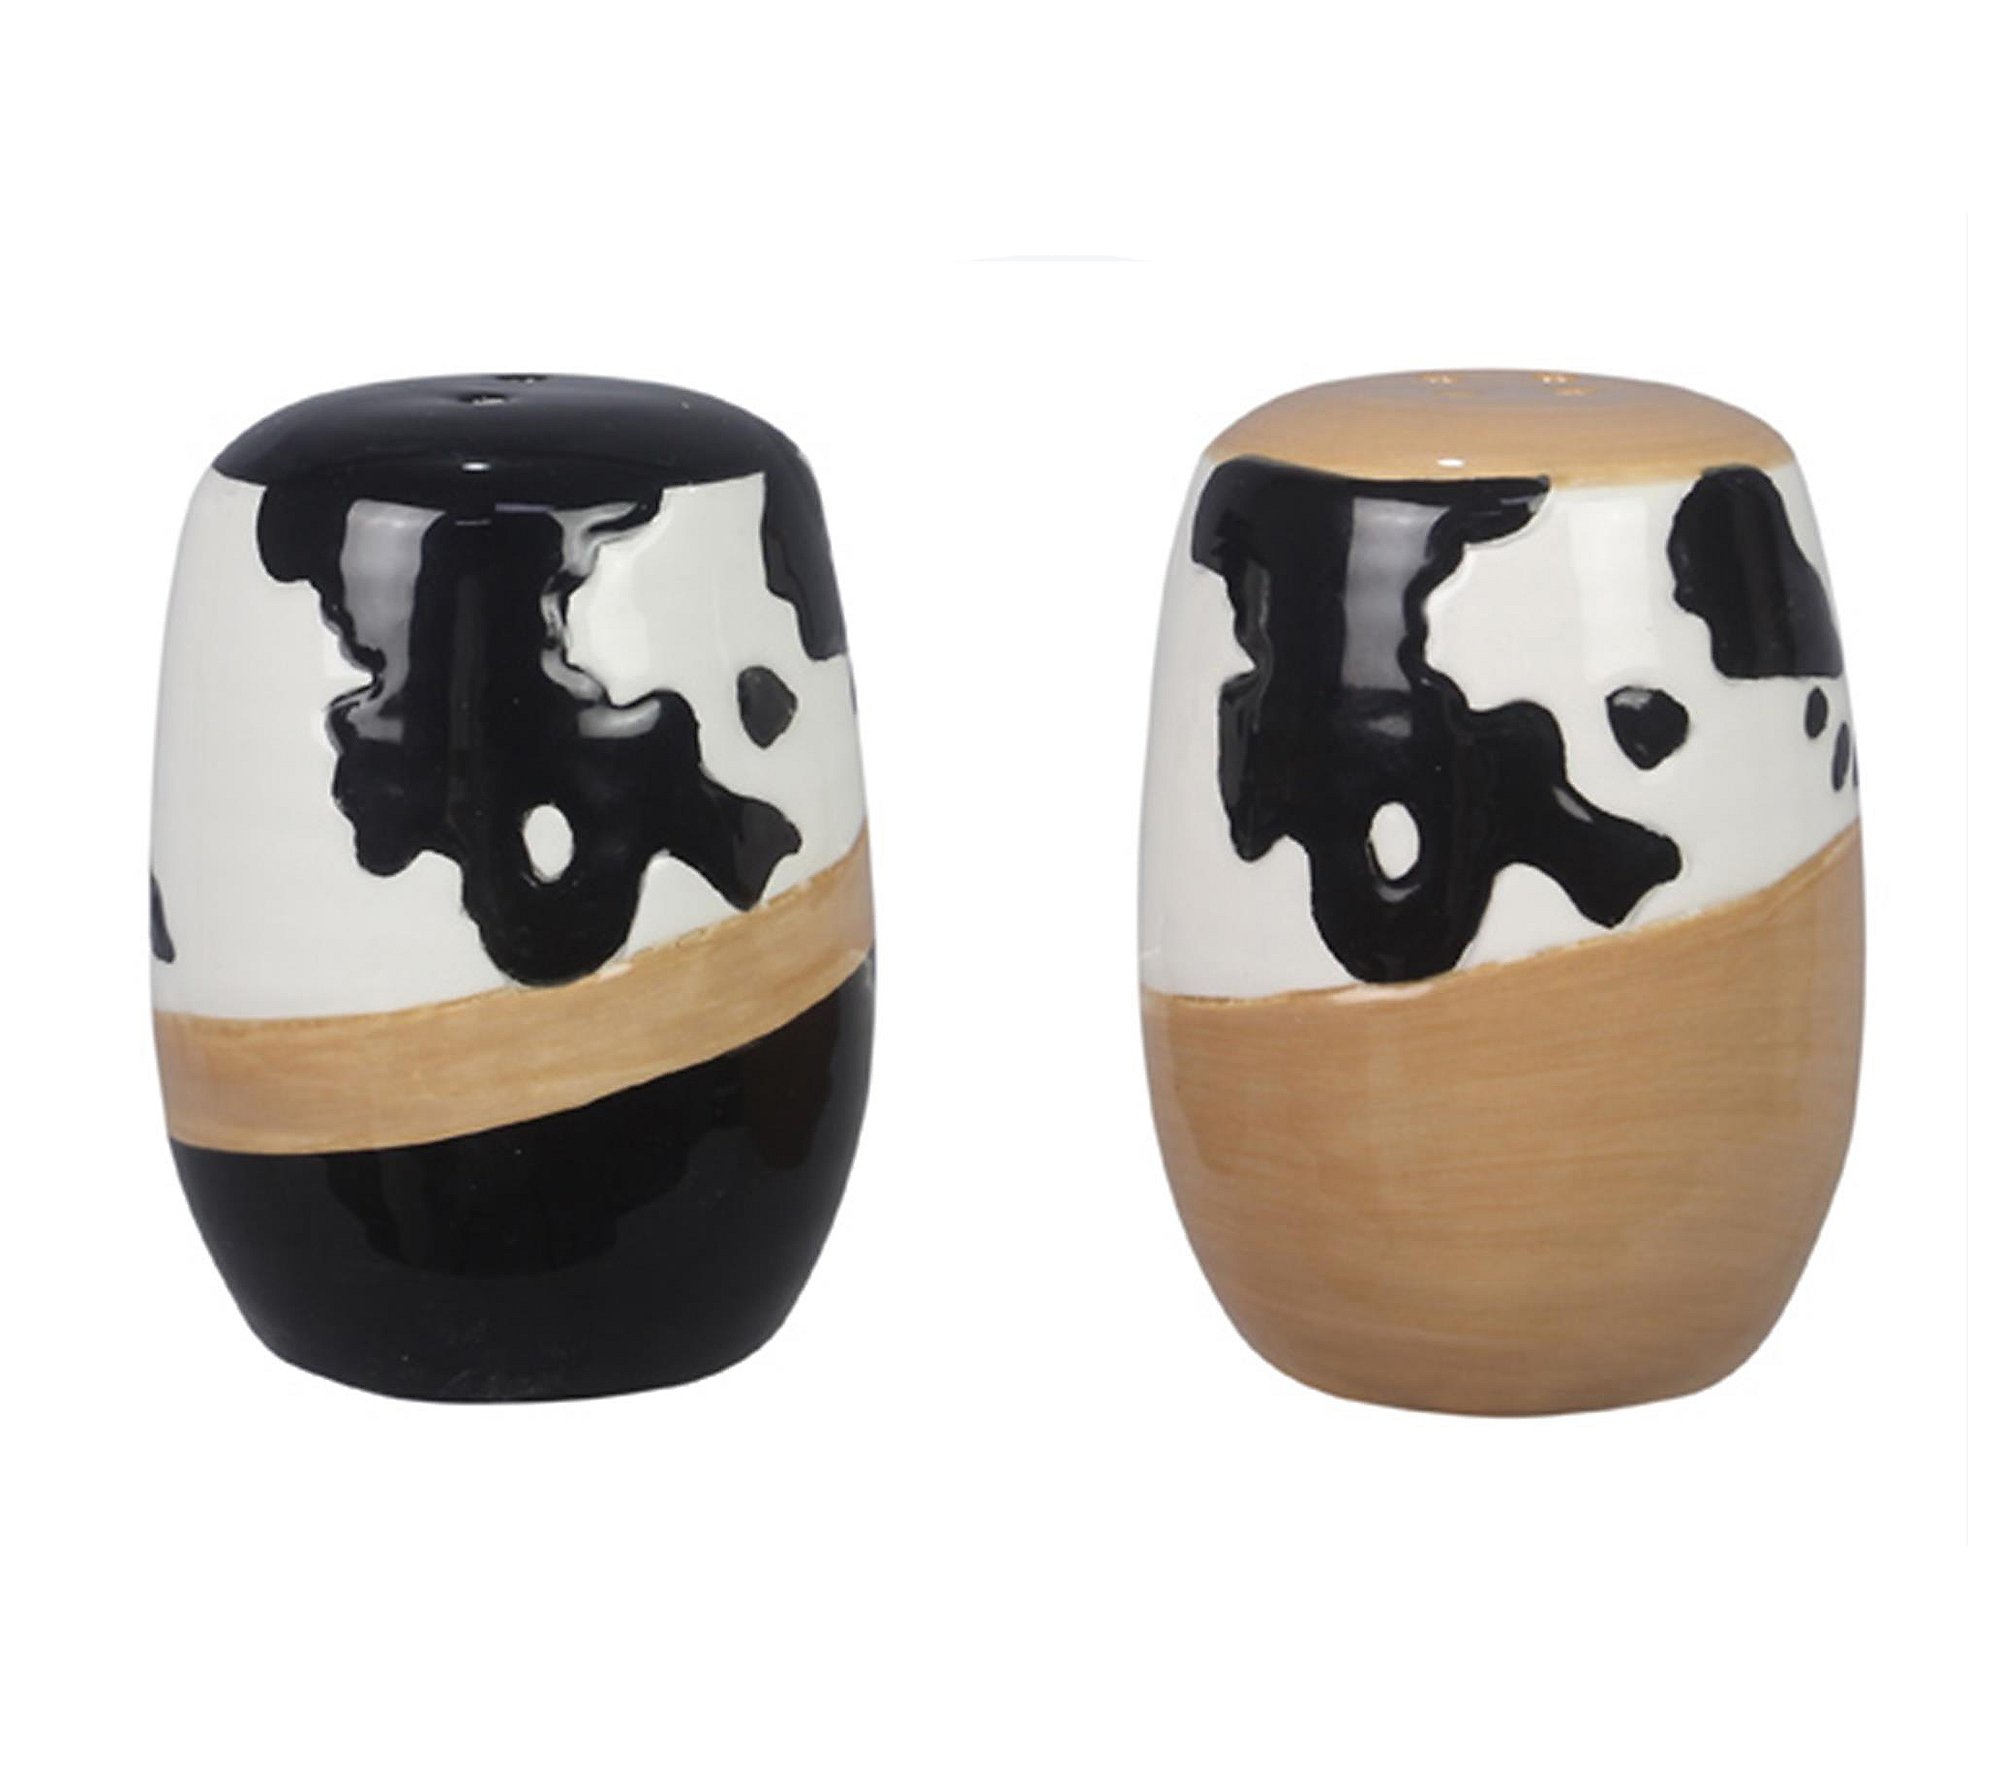 Young's Inc 2-Piece Ceramic Country Salt and Pepper Shaker Set